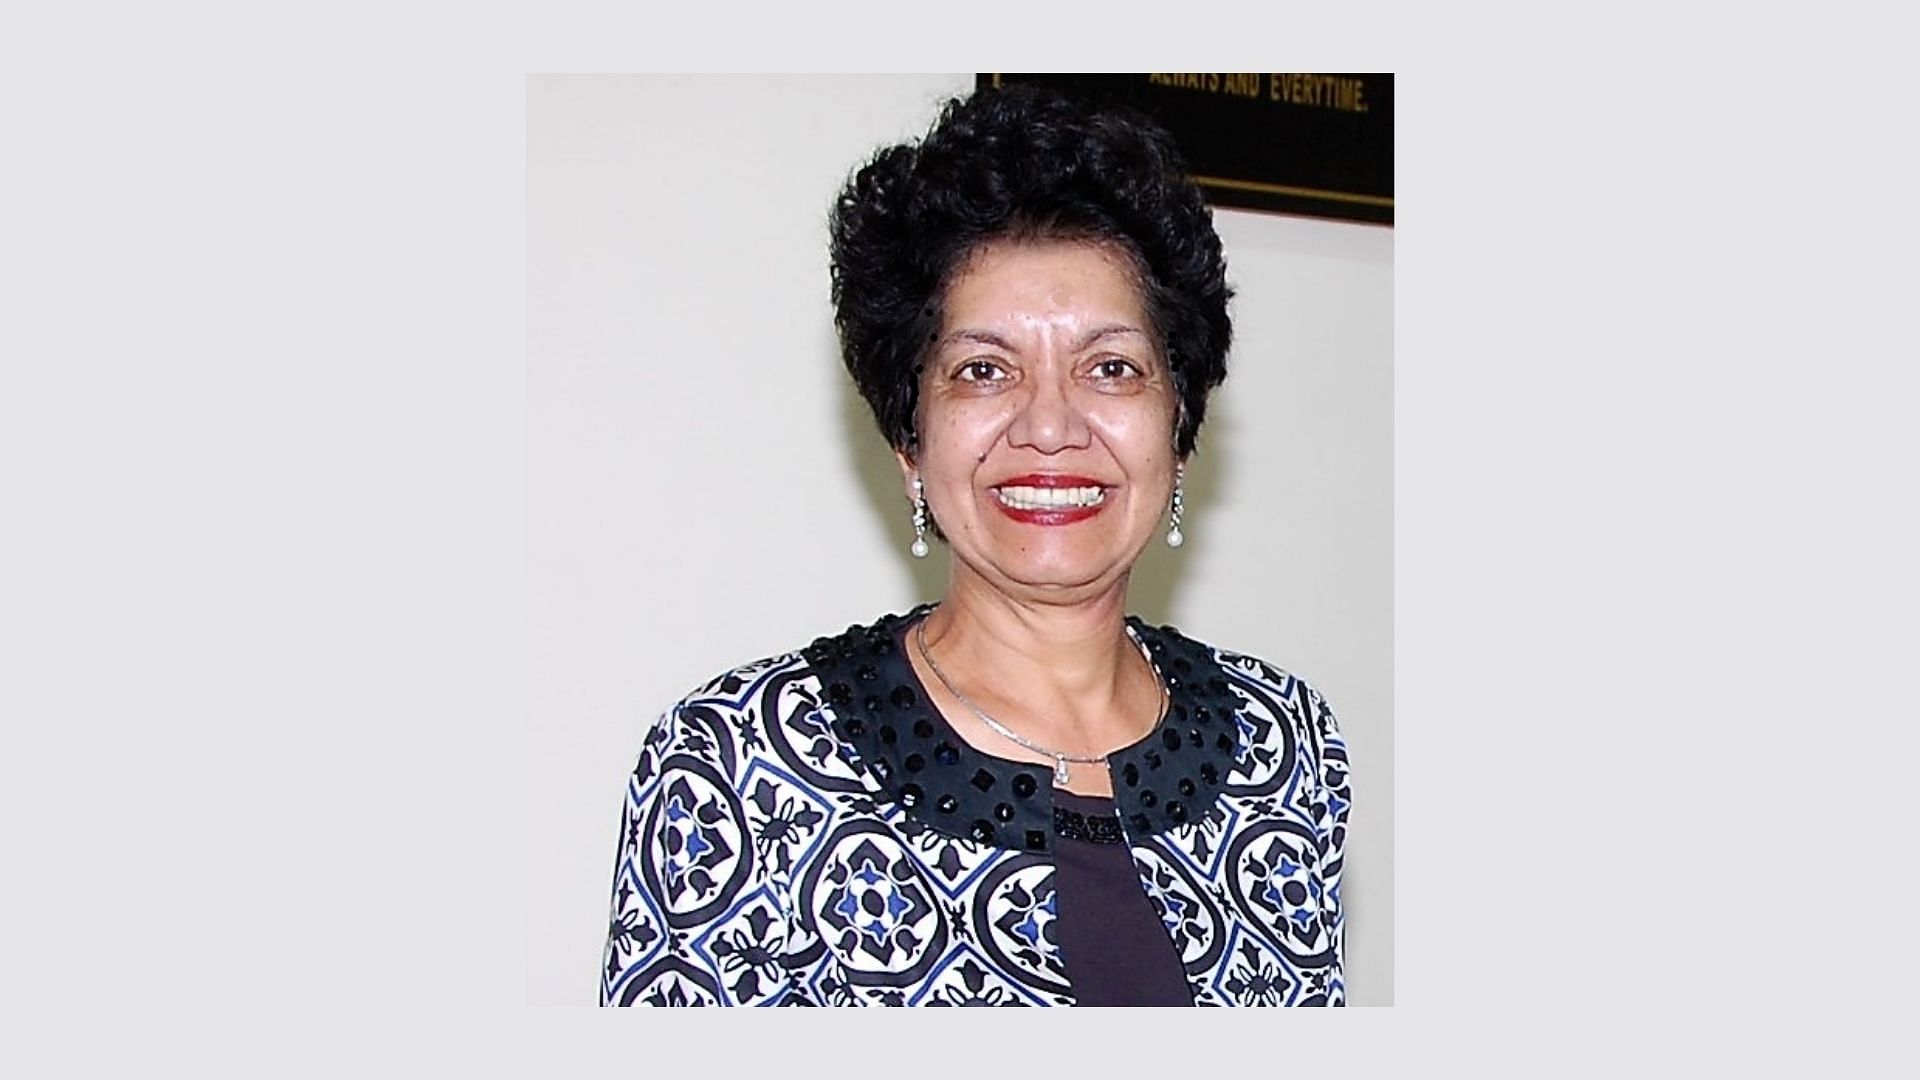 Anju Seth stepped down as a director from the Indian Institute of Management-Calcutta on Monday, 22 March.